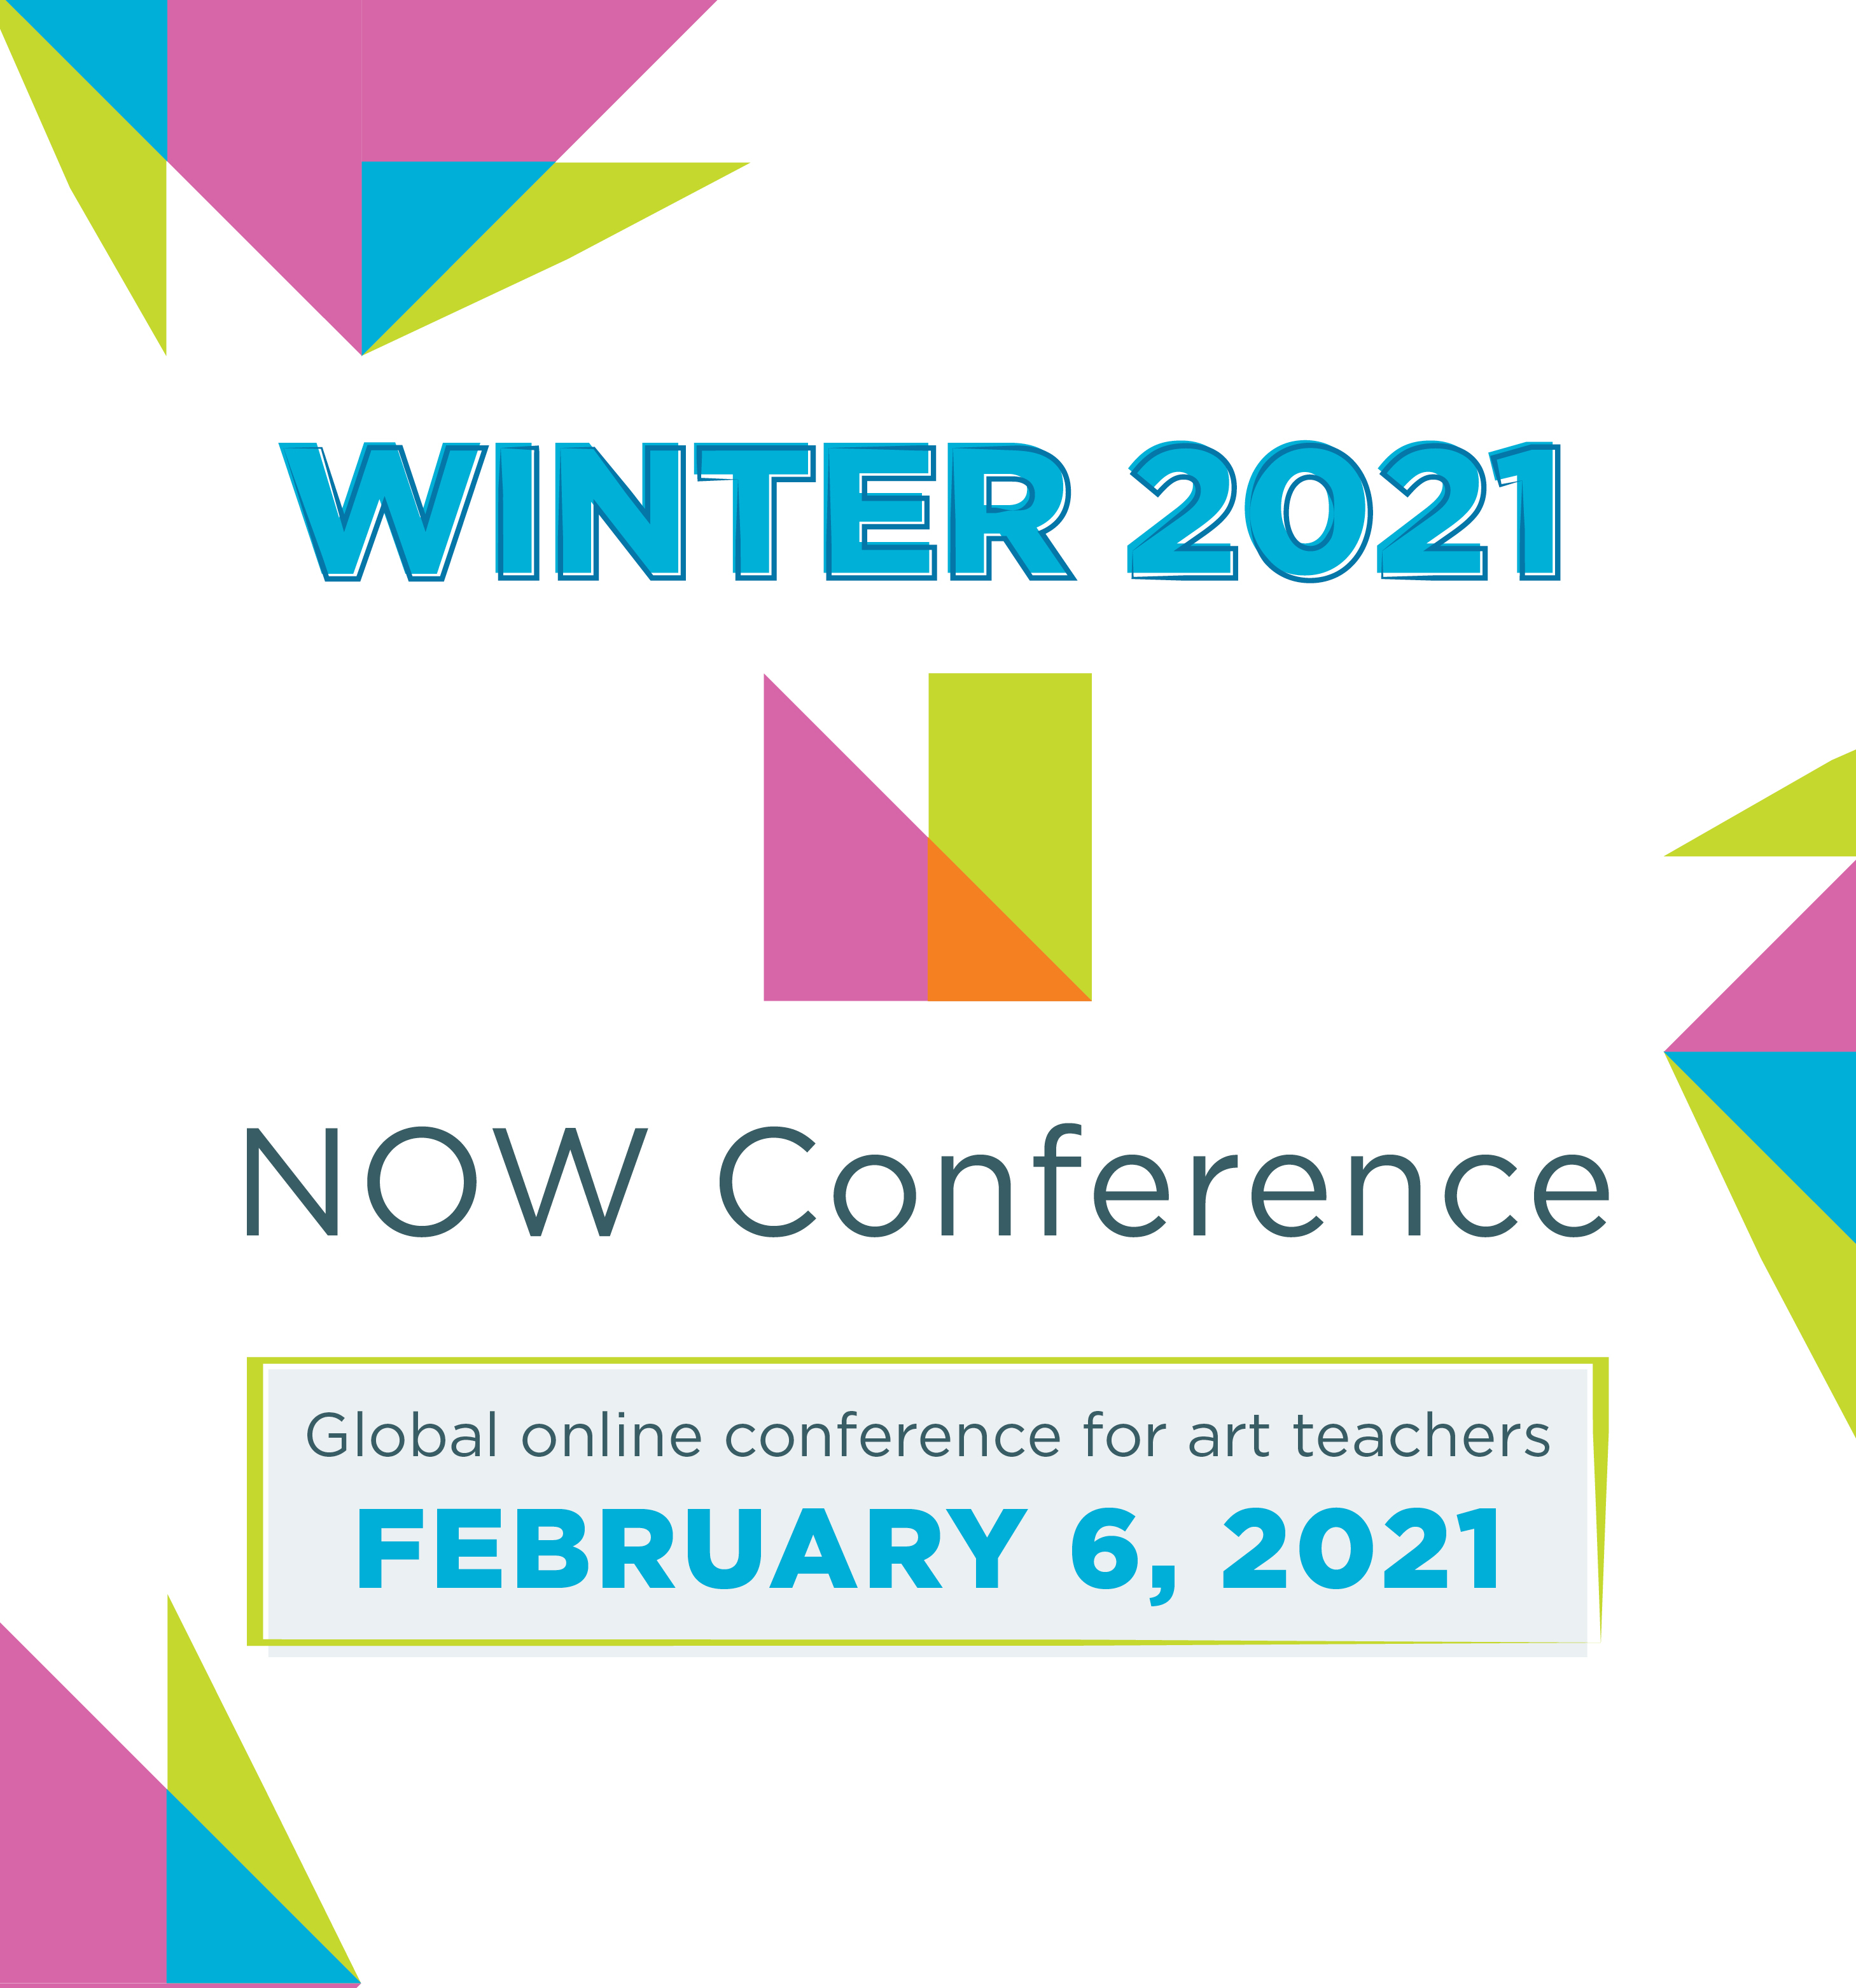 Winter 2021 NOW Conference